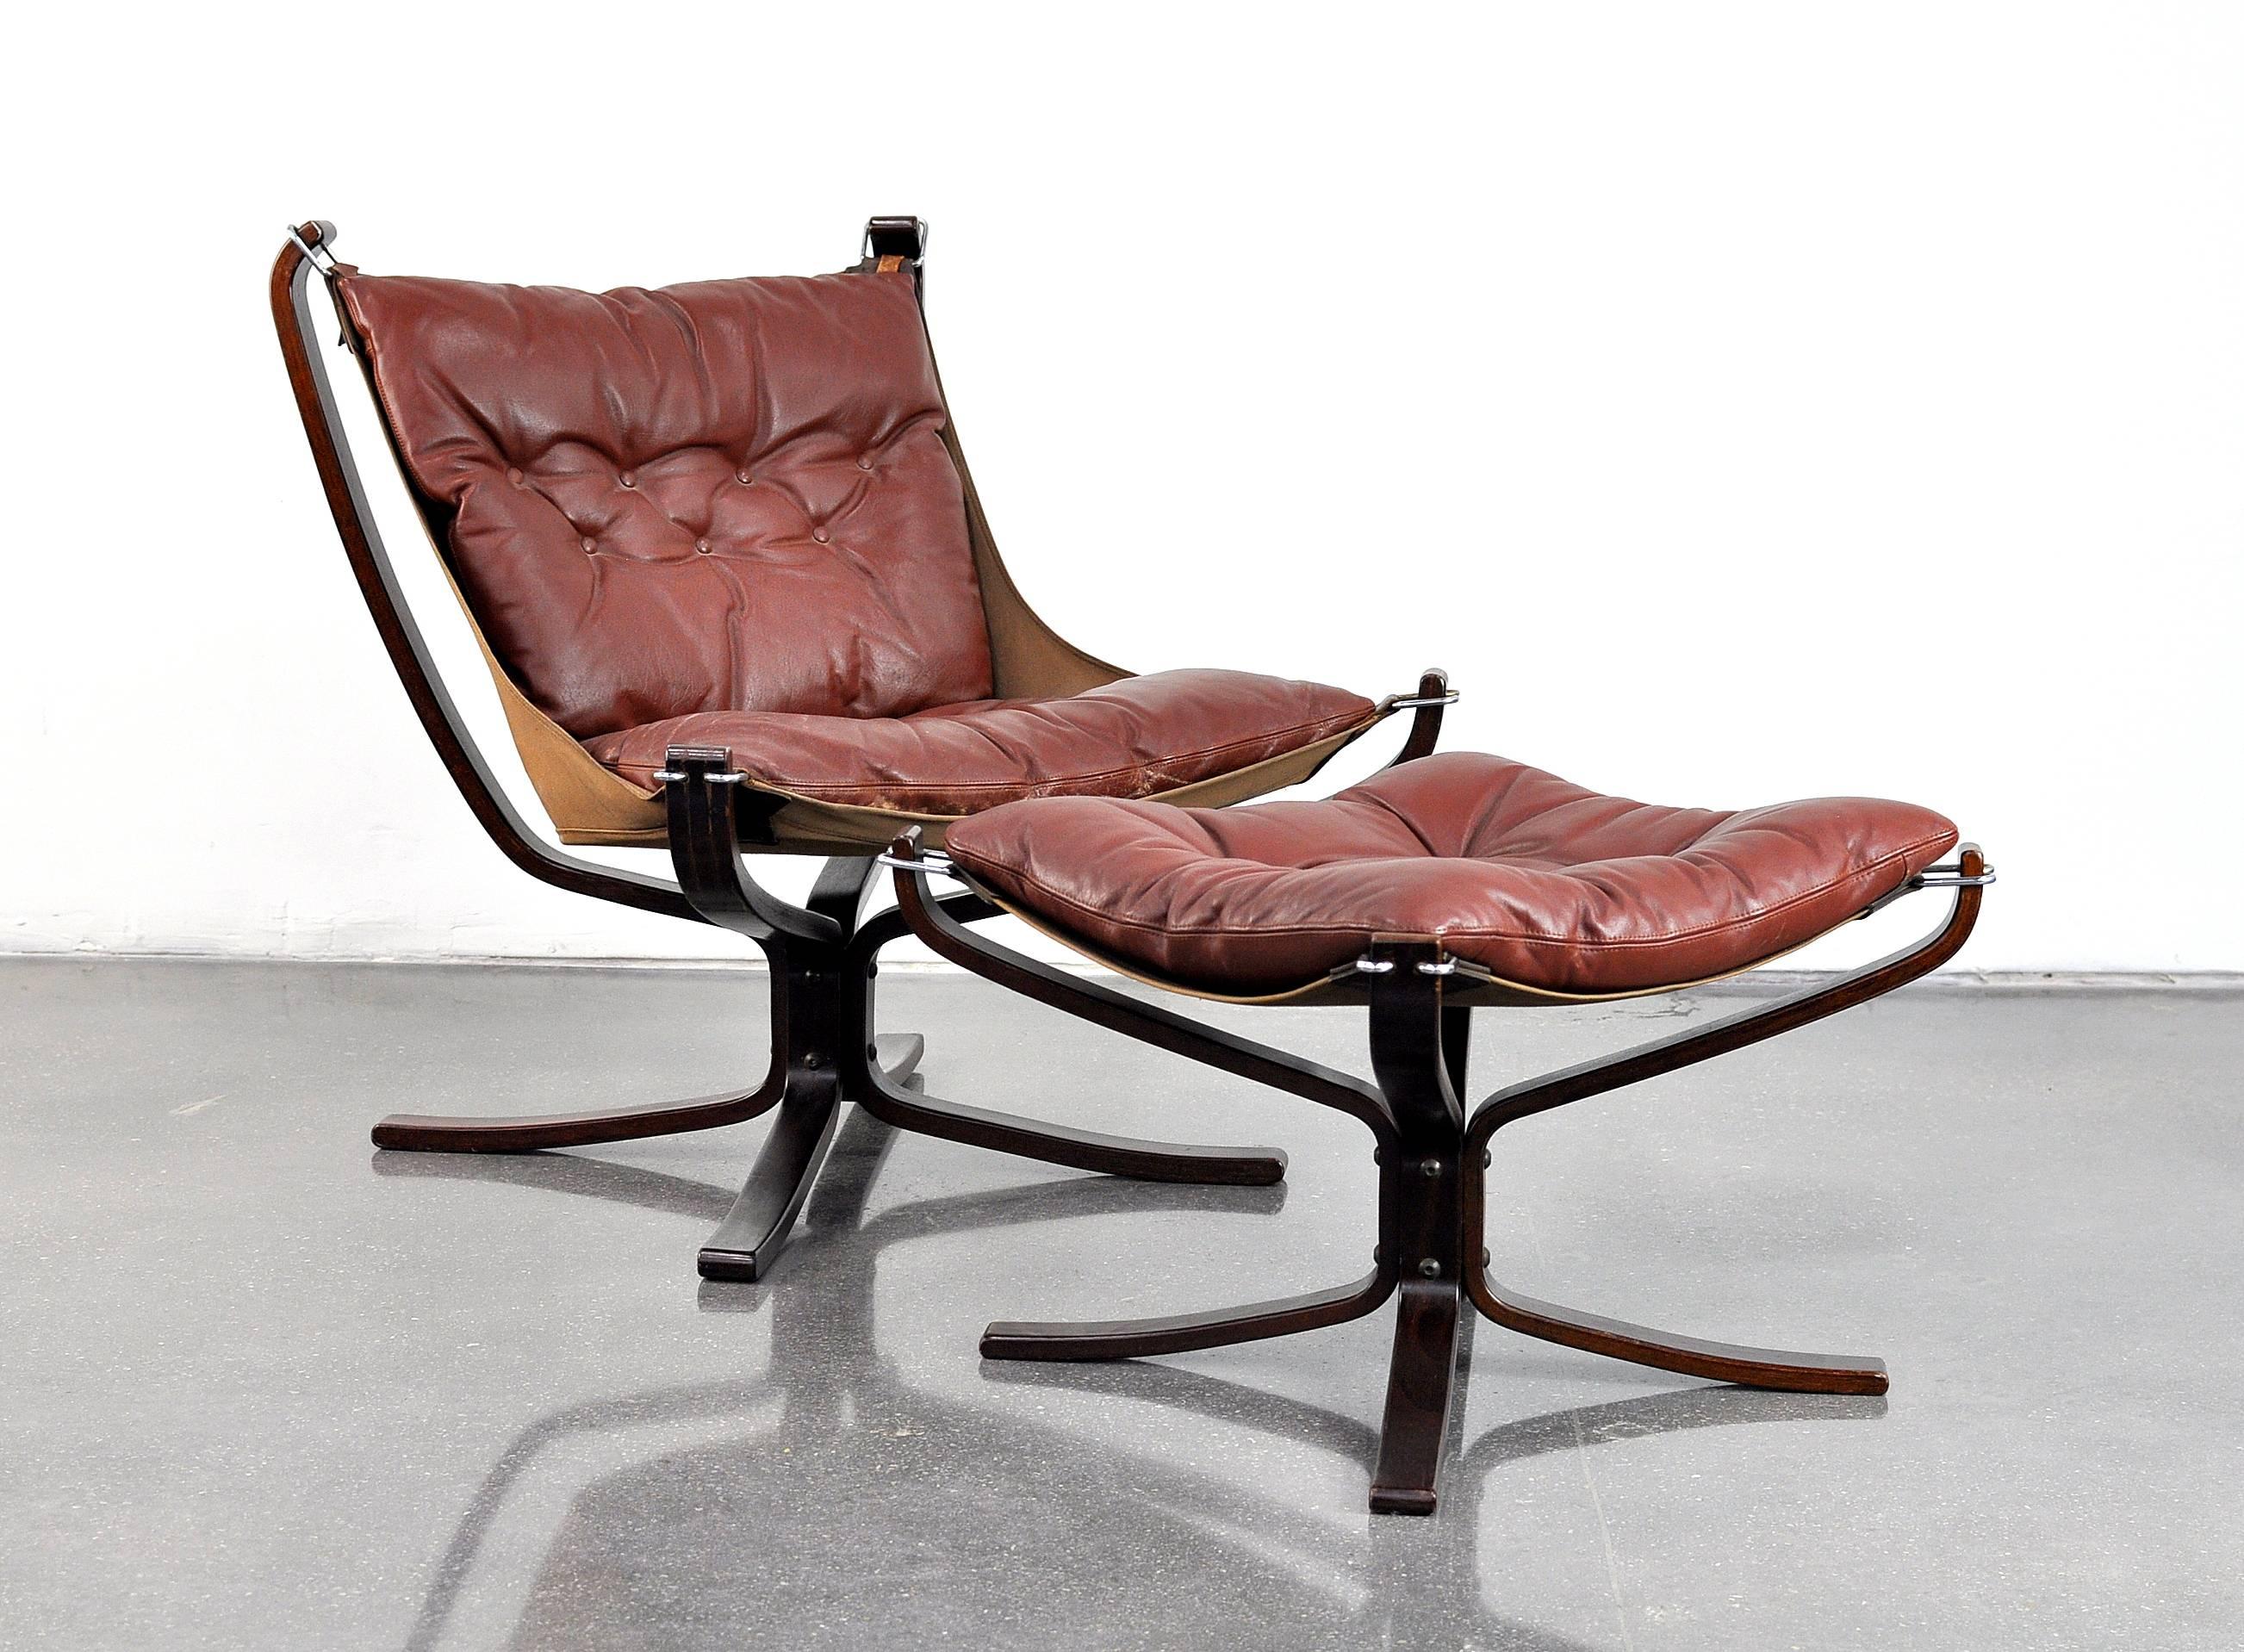 A vintage Mid-Century Danish Modern leather lounge chair and ottoman, designed in 1972 by Sigurd Ressell for Vatne Mobler, and dating from the mid-1970s. The bentwood frame features a rosewood finish, stretched tan canvas and leather cushions. An